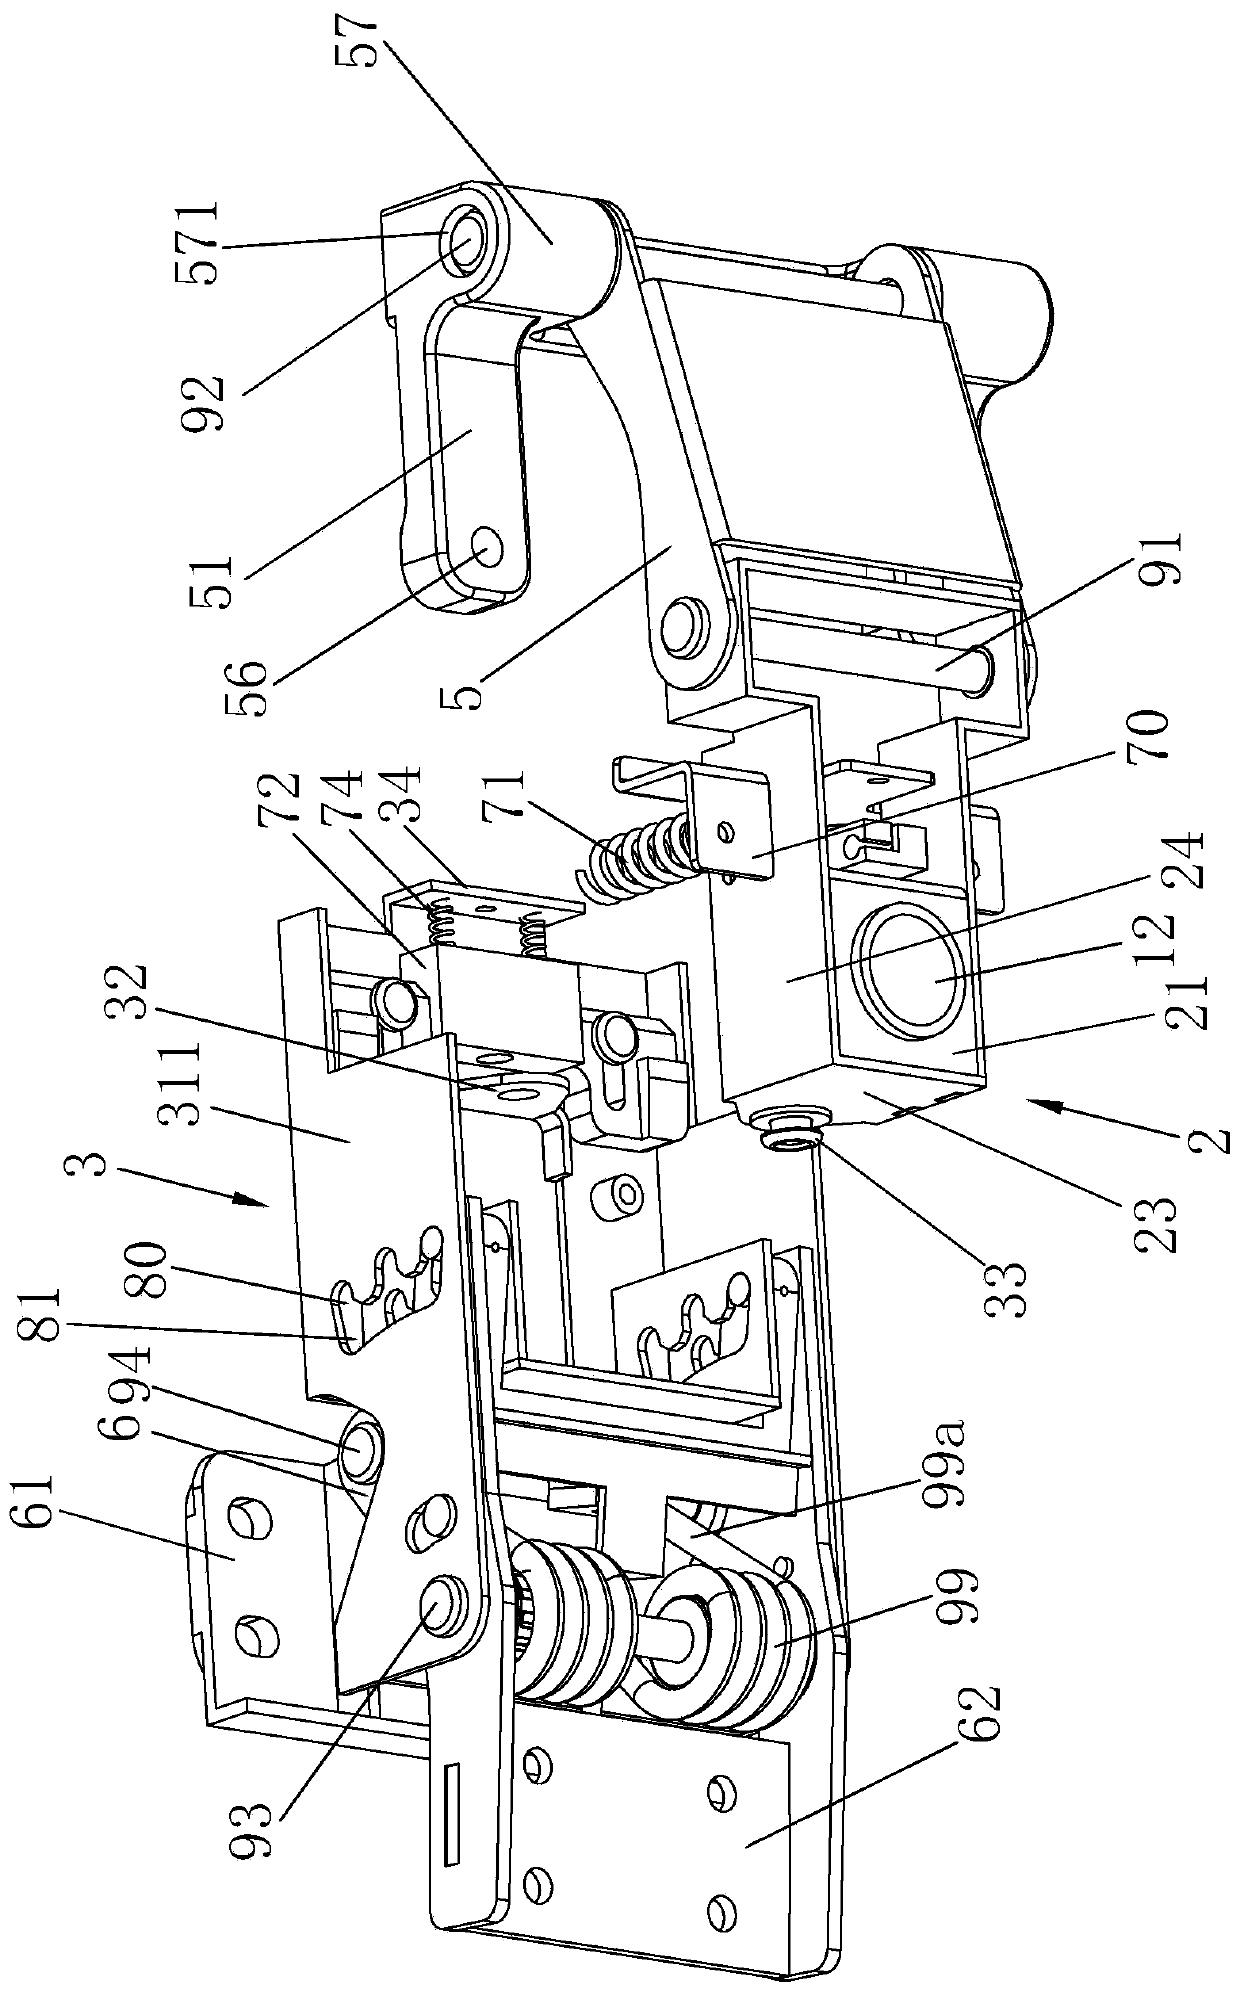 Full-dynamic seat back synchronous linkage device